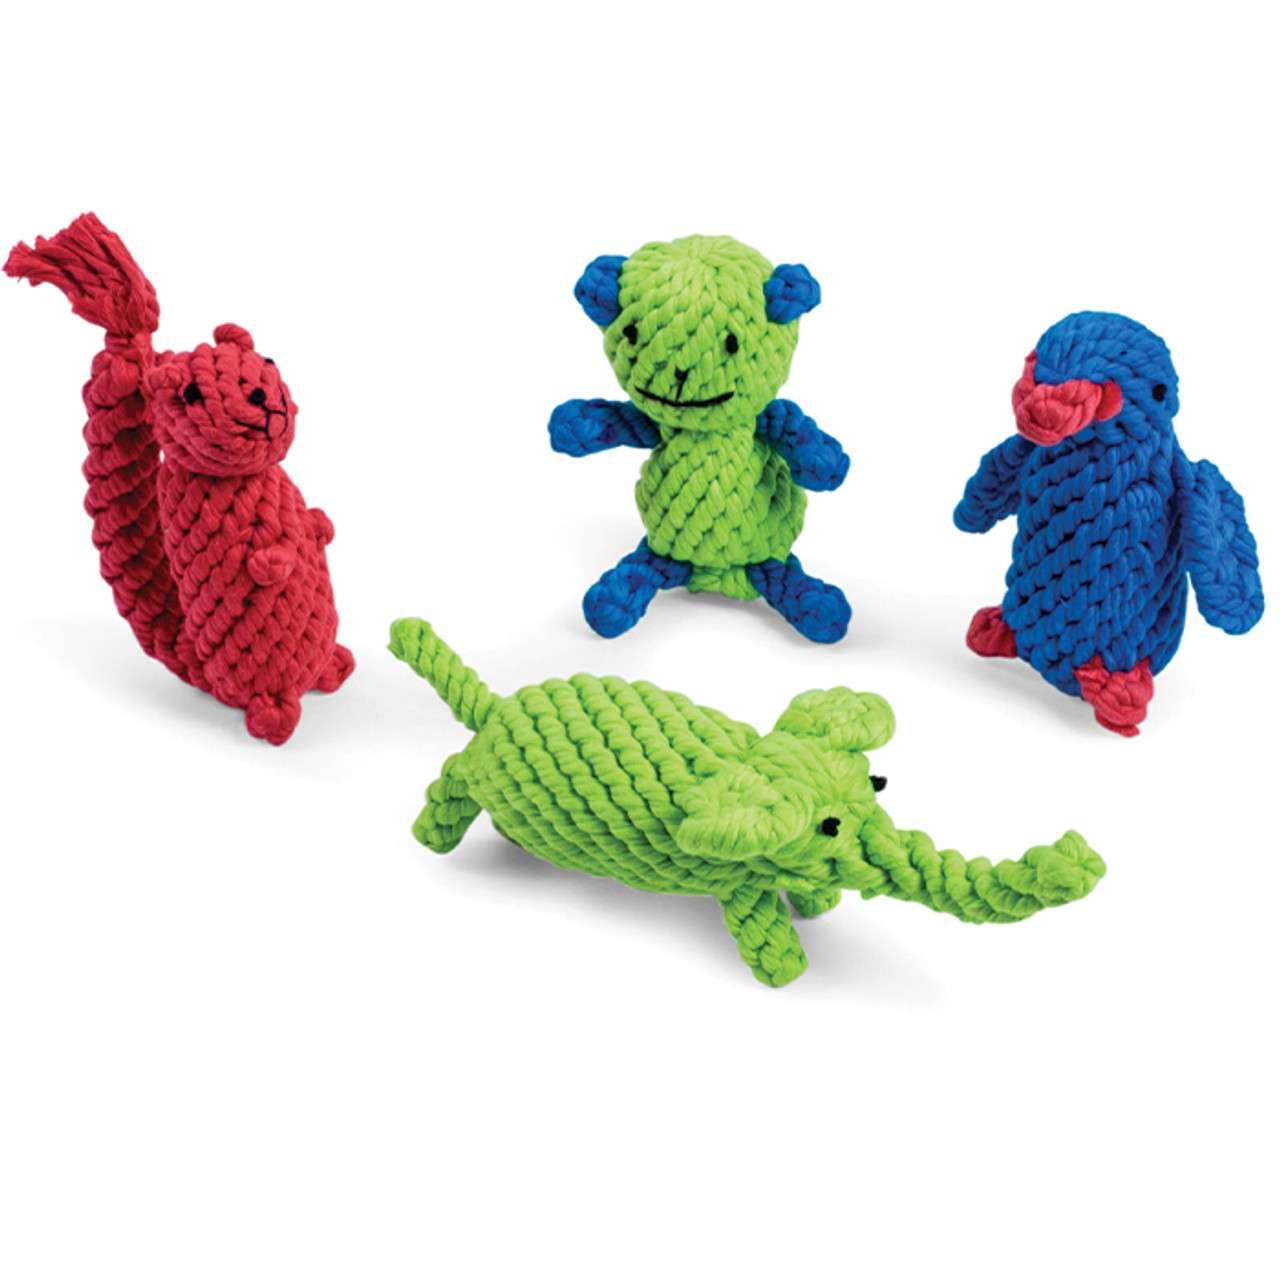 TOYZ Mixed Rope Characters (Qty 1)